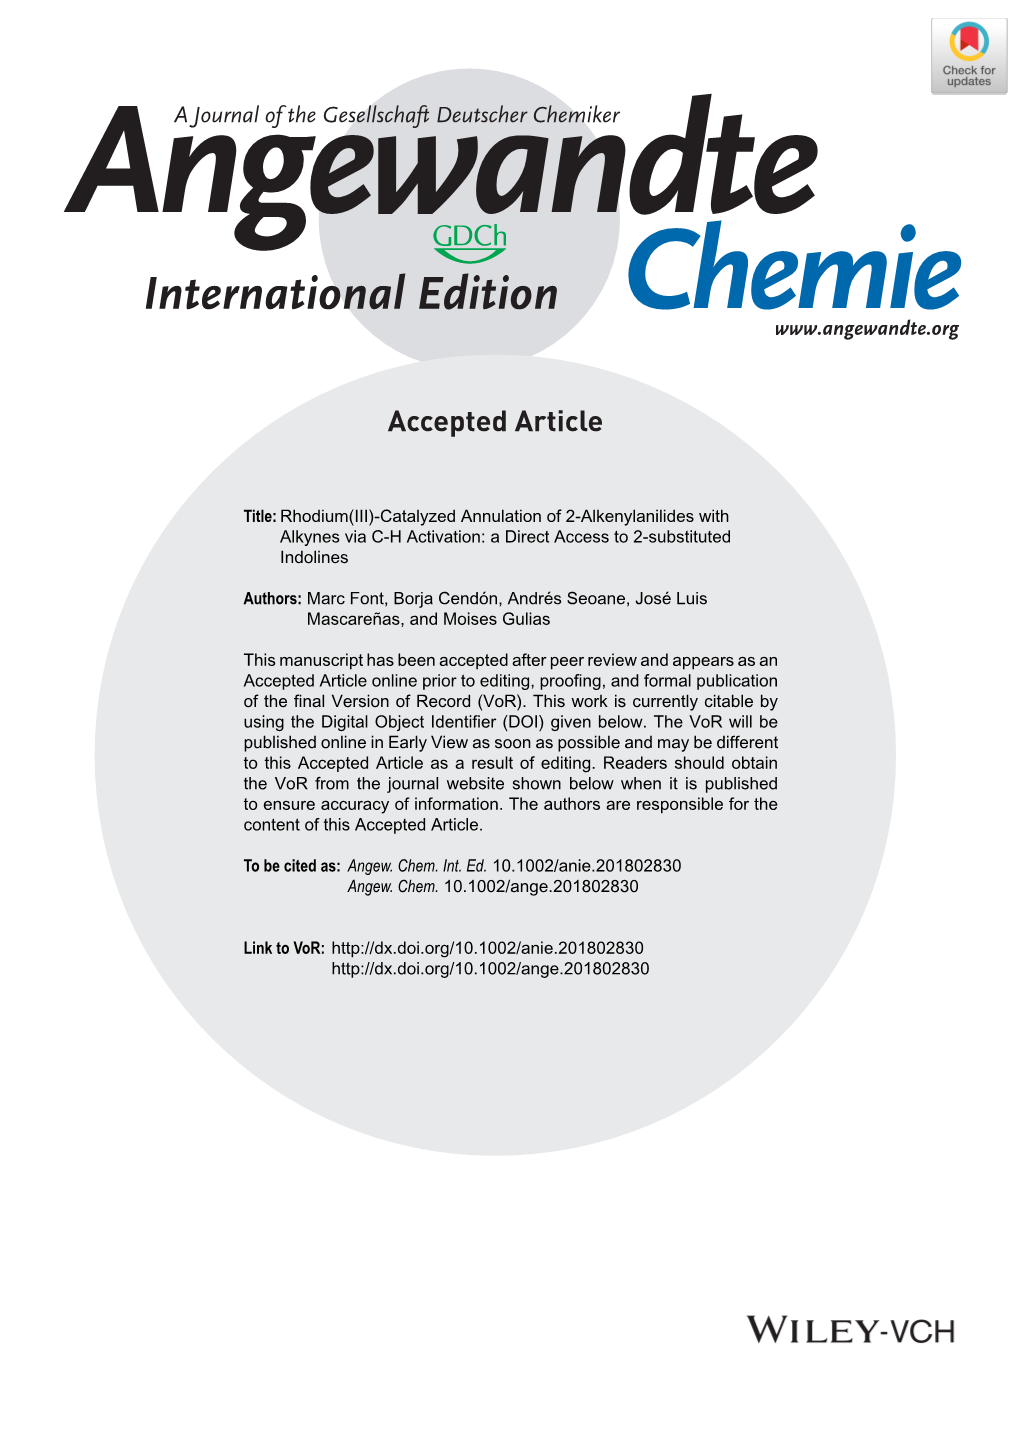 Rhodium(III)-Catalyzed Annulation of 2-Alkenylanilides with Alkynes Via C-H Activation: a Direct Access to 2-Substituted Indolines